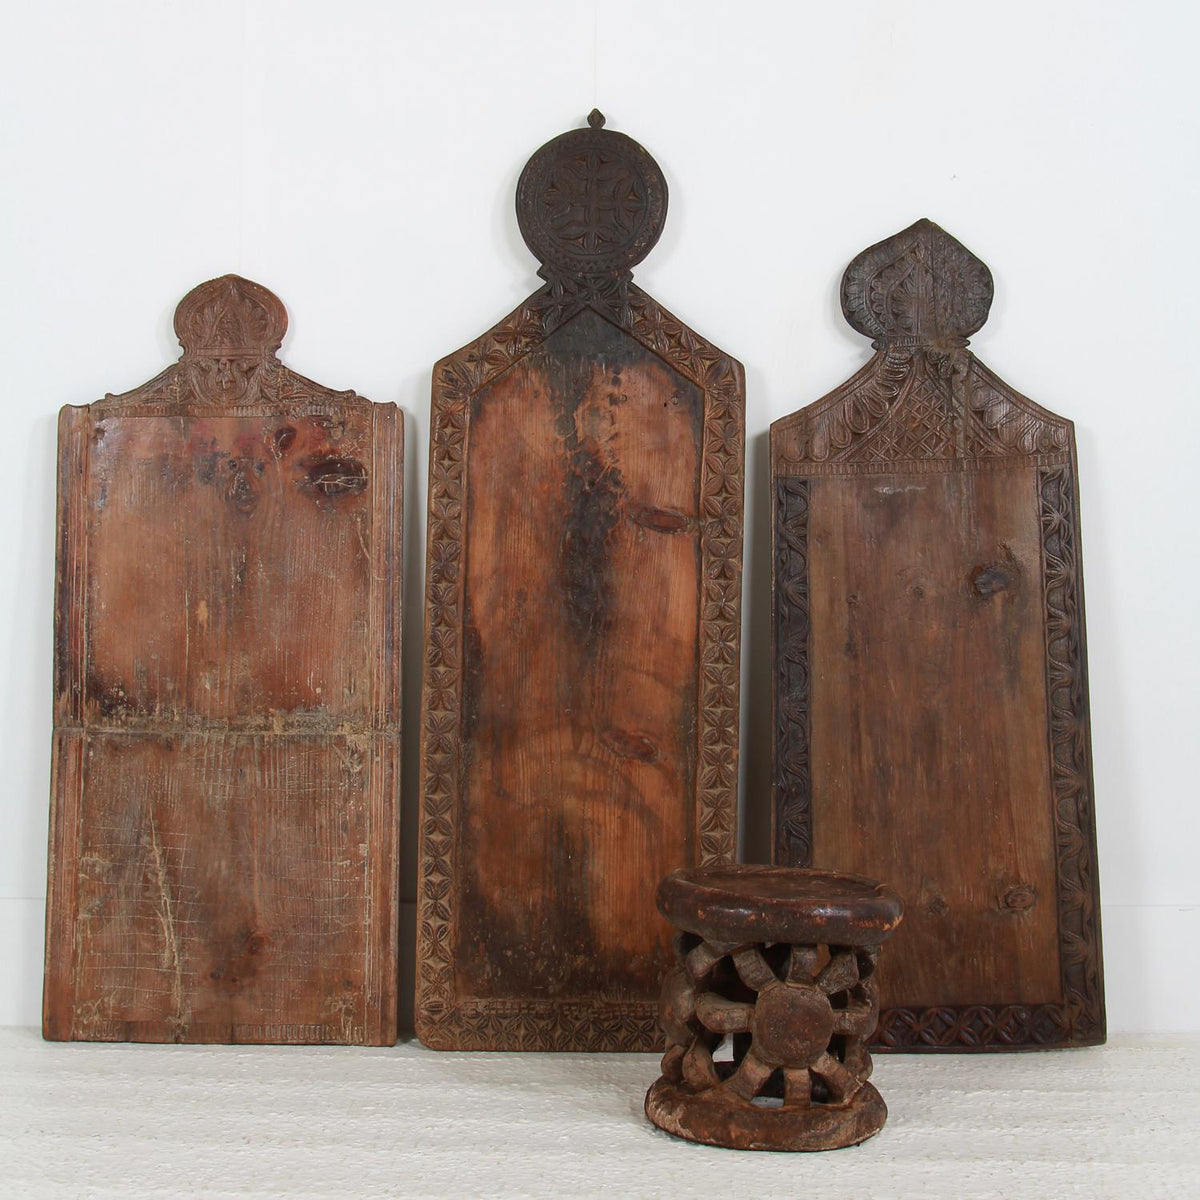 Rare Carved Decorative Wooden Prayer Wall Fragments